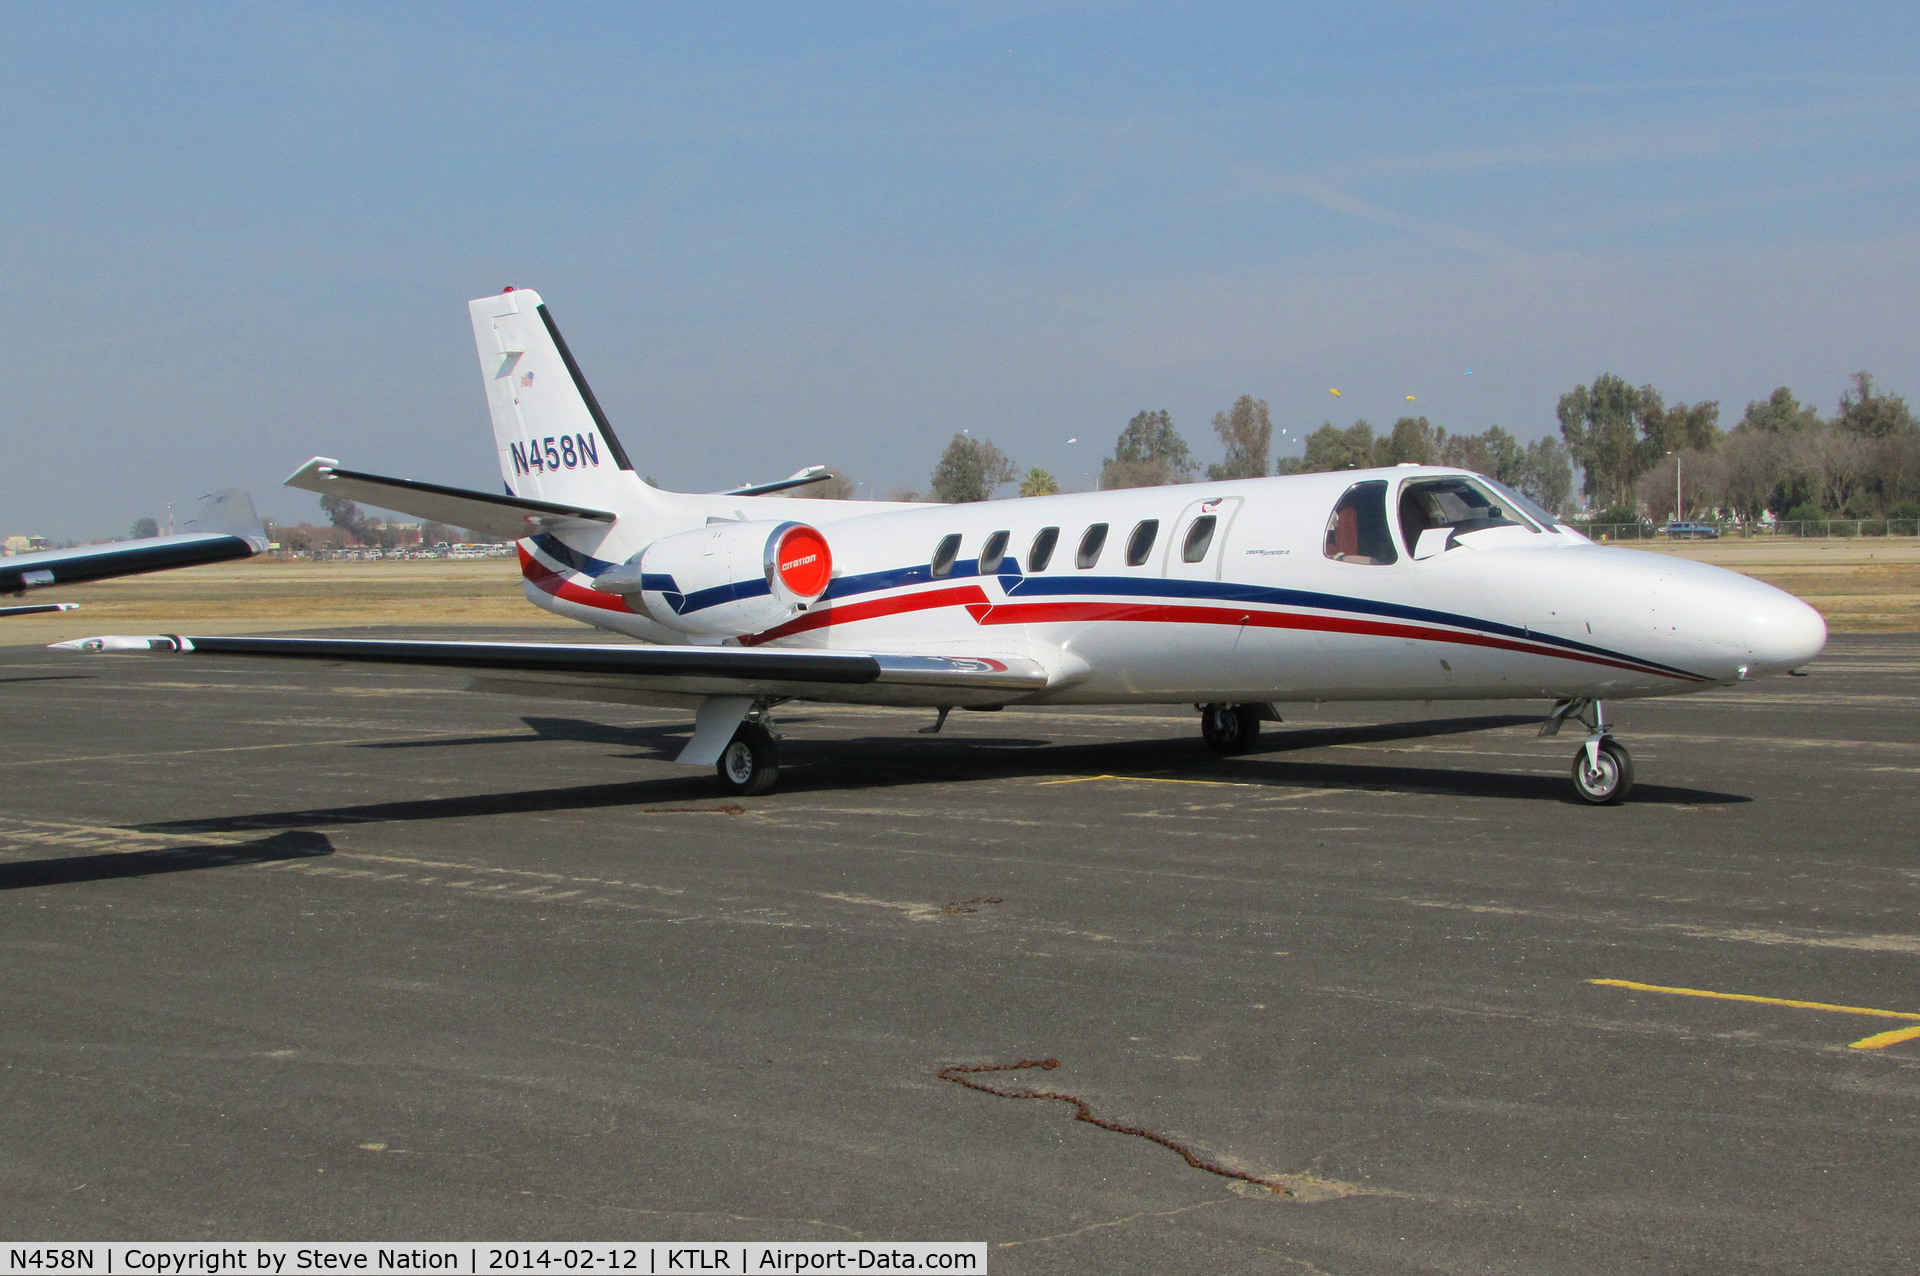 N458N, 1979 Cessna 550 C/N 550-0061, Eagle NW Air (Salem, OR) Cessna 550 in for International Ag Expo 2014